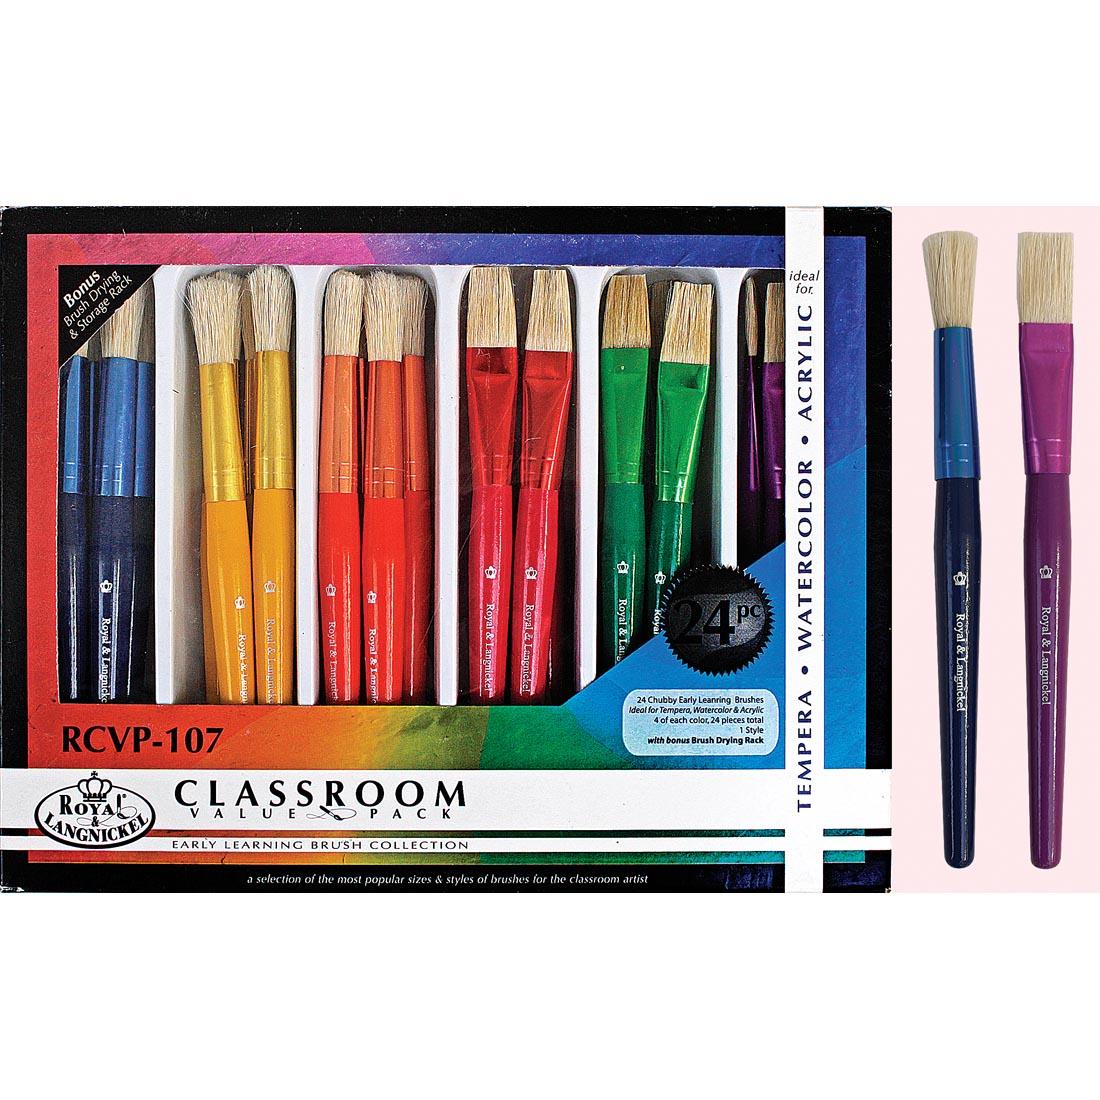 Royal & Langnickel Classroom Value Pack Early Learning Brush Collection shown in the package with examples of the 2 different brush styles beside it